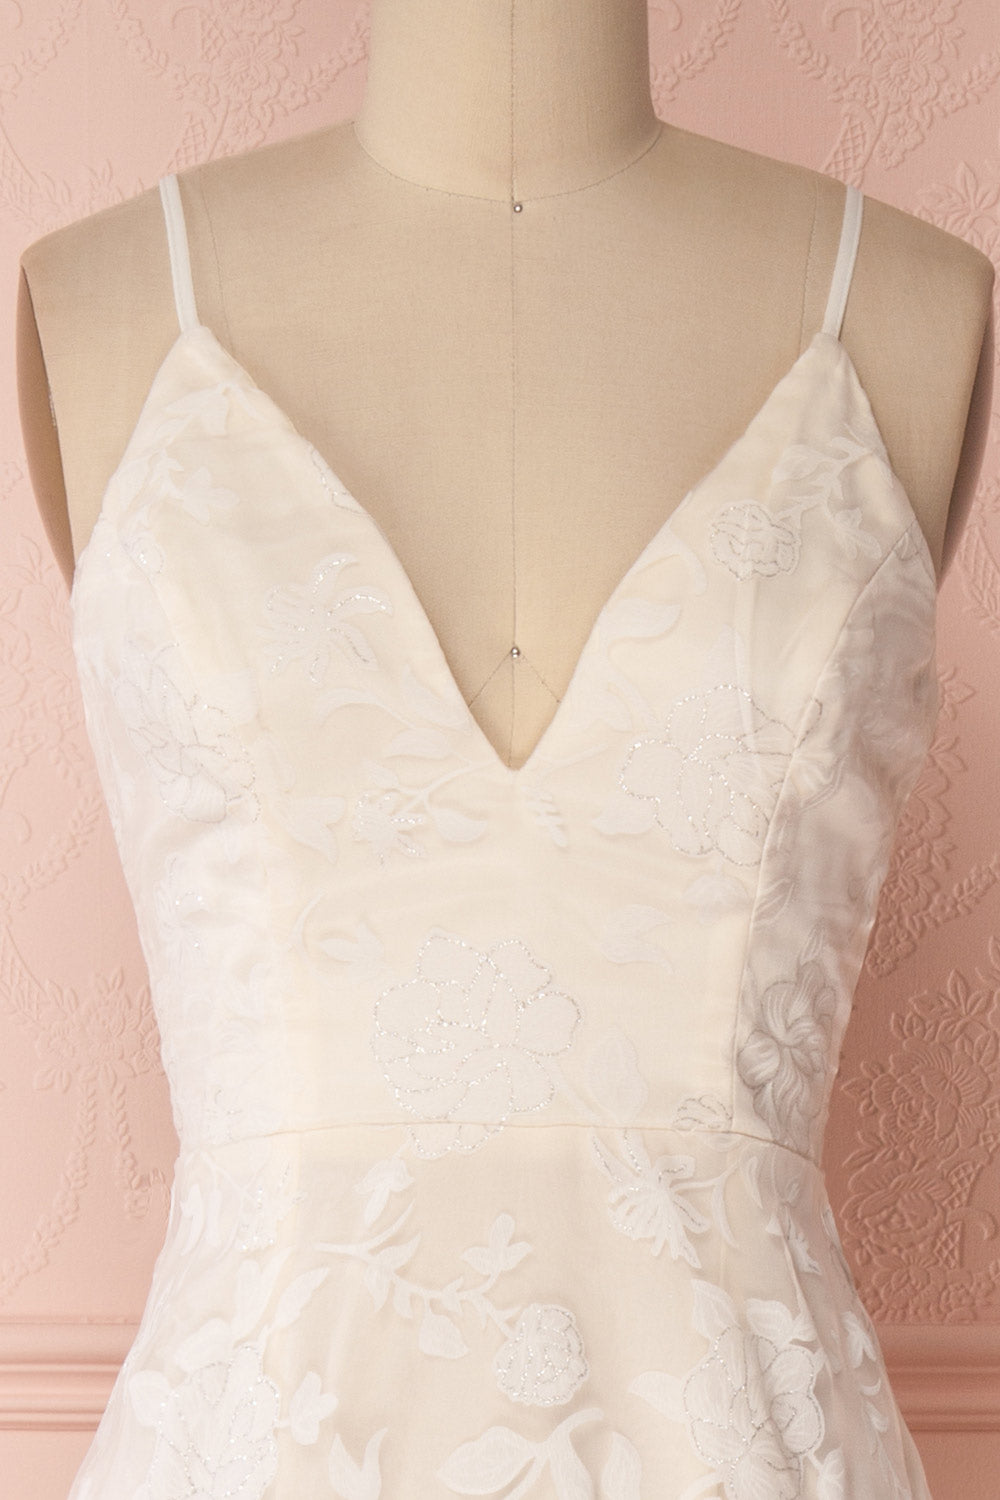 Maylee Cream & White Floral Bridal Gown | Boudoir 1861